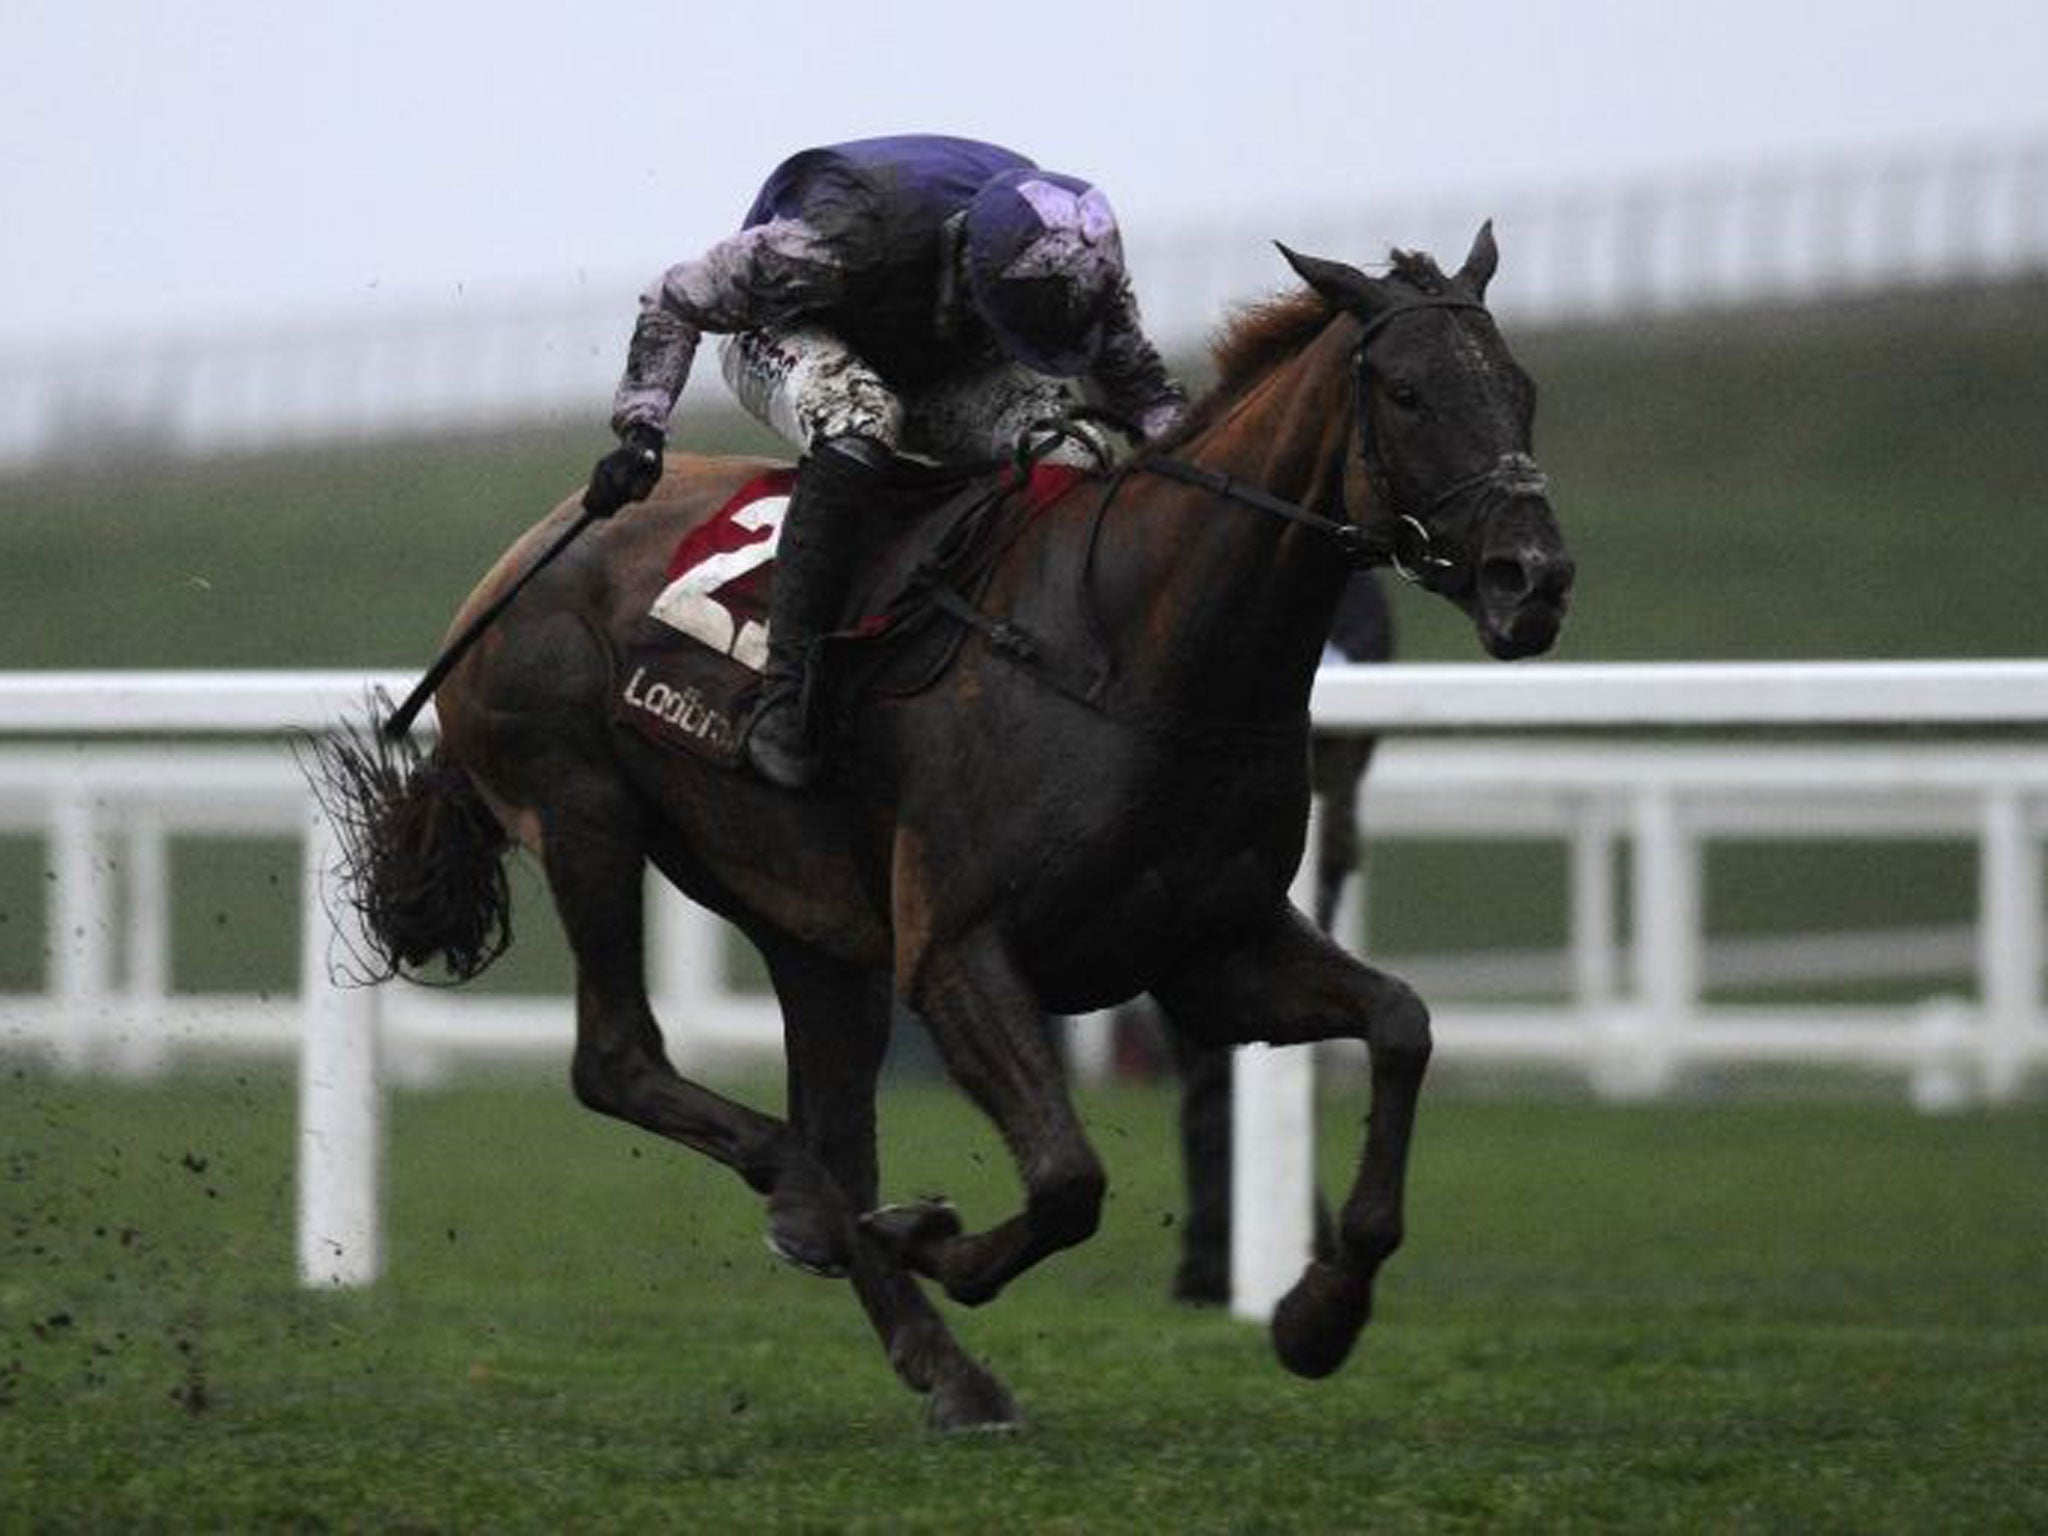 At the double: Harry Skelton rides Willow’s Saviour to victory in the Ladbroke Hurdle for his older brother Dan